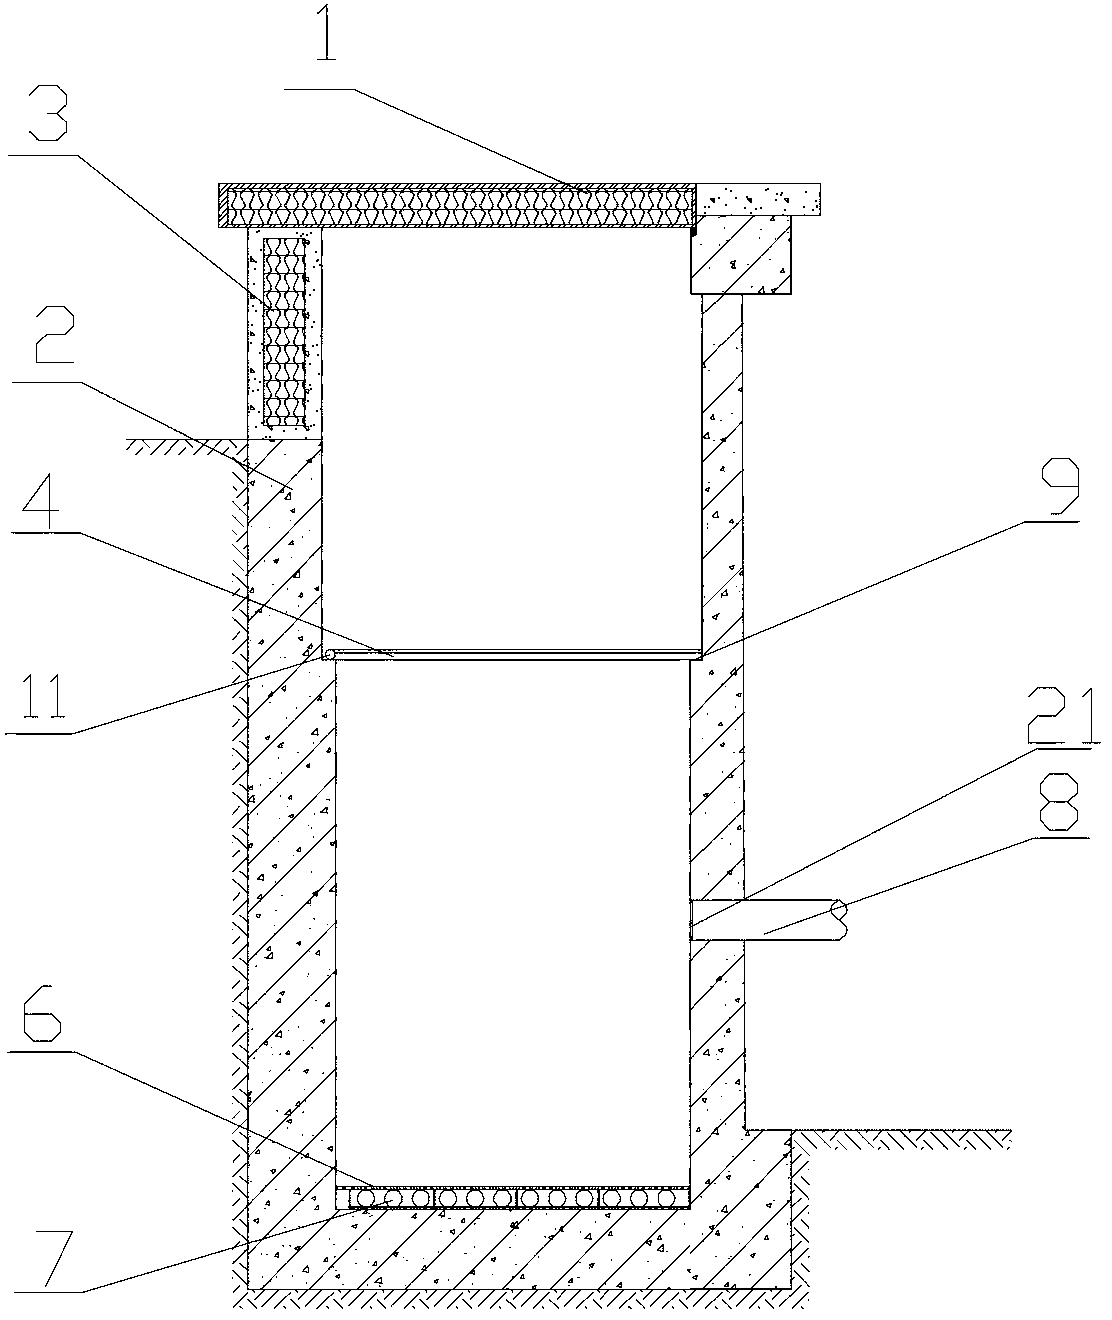 Hot-air circulating two-layered snow melting system and method for recycling accumulated snow